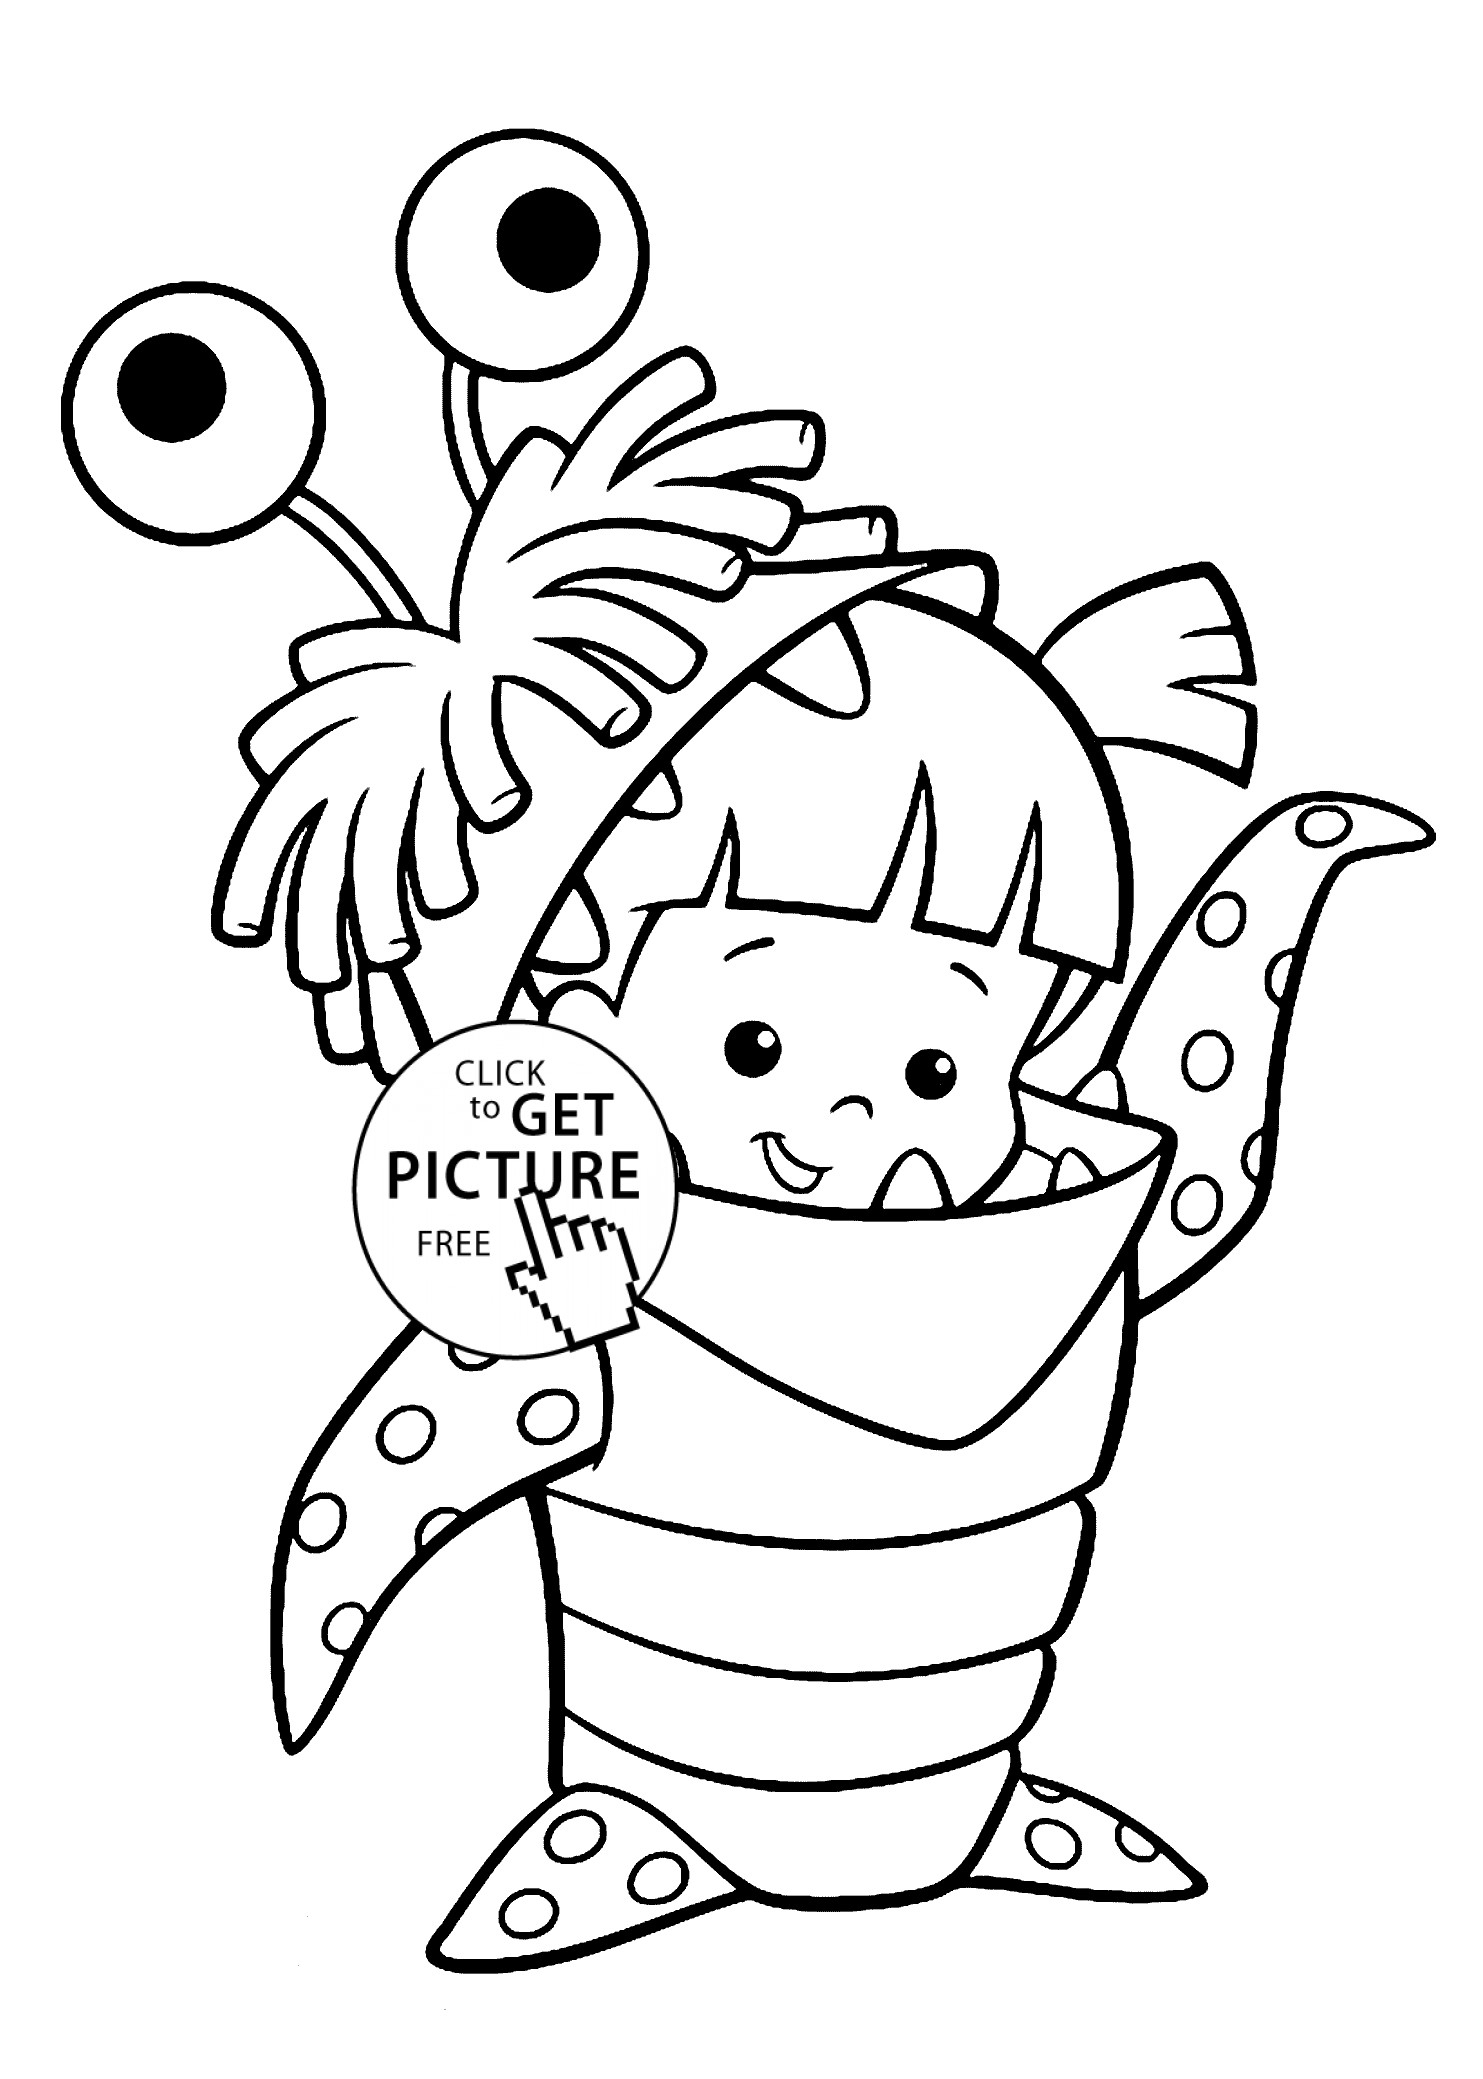 Moshi Monster Coloring Pages Printable Monster Coloring Pages Get Coloring Pages For You